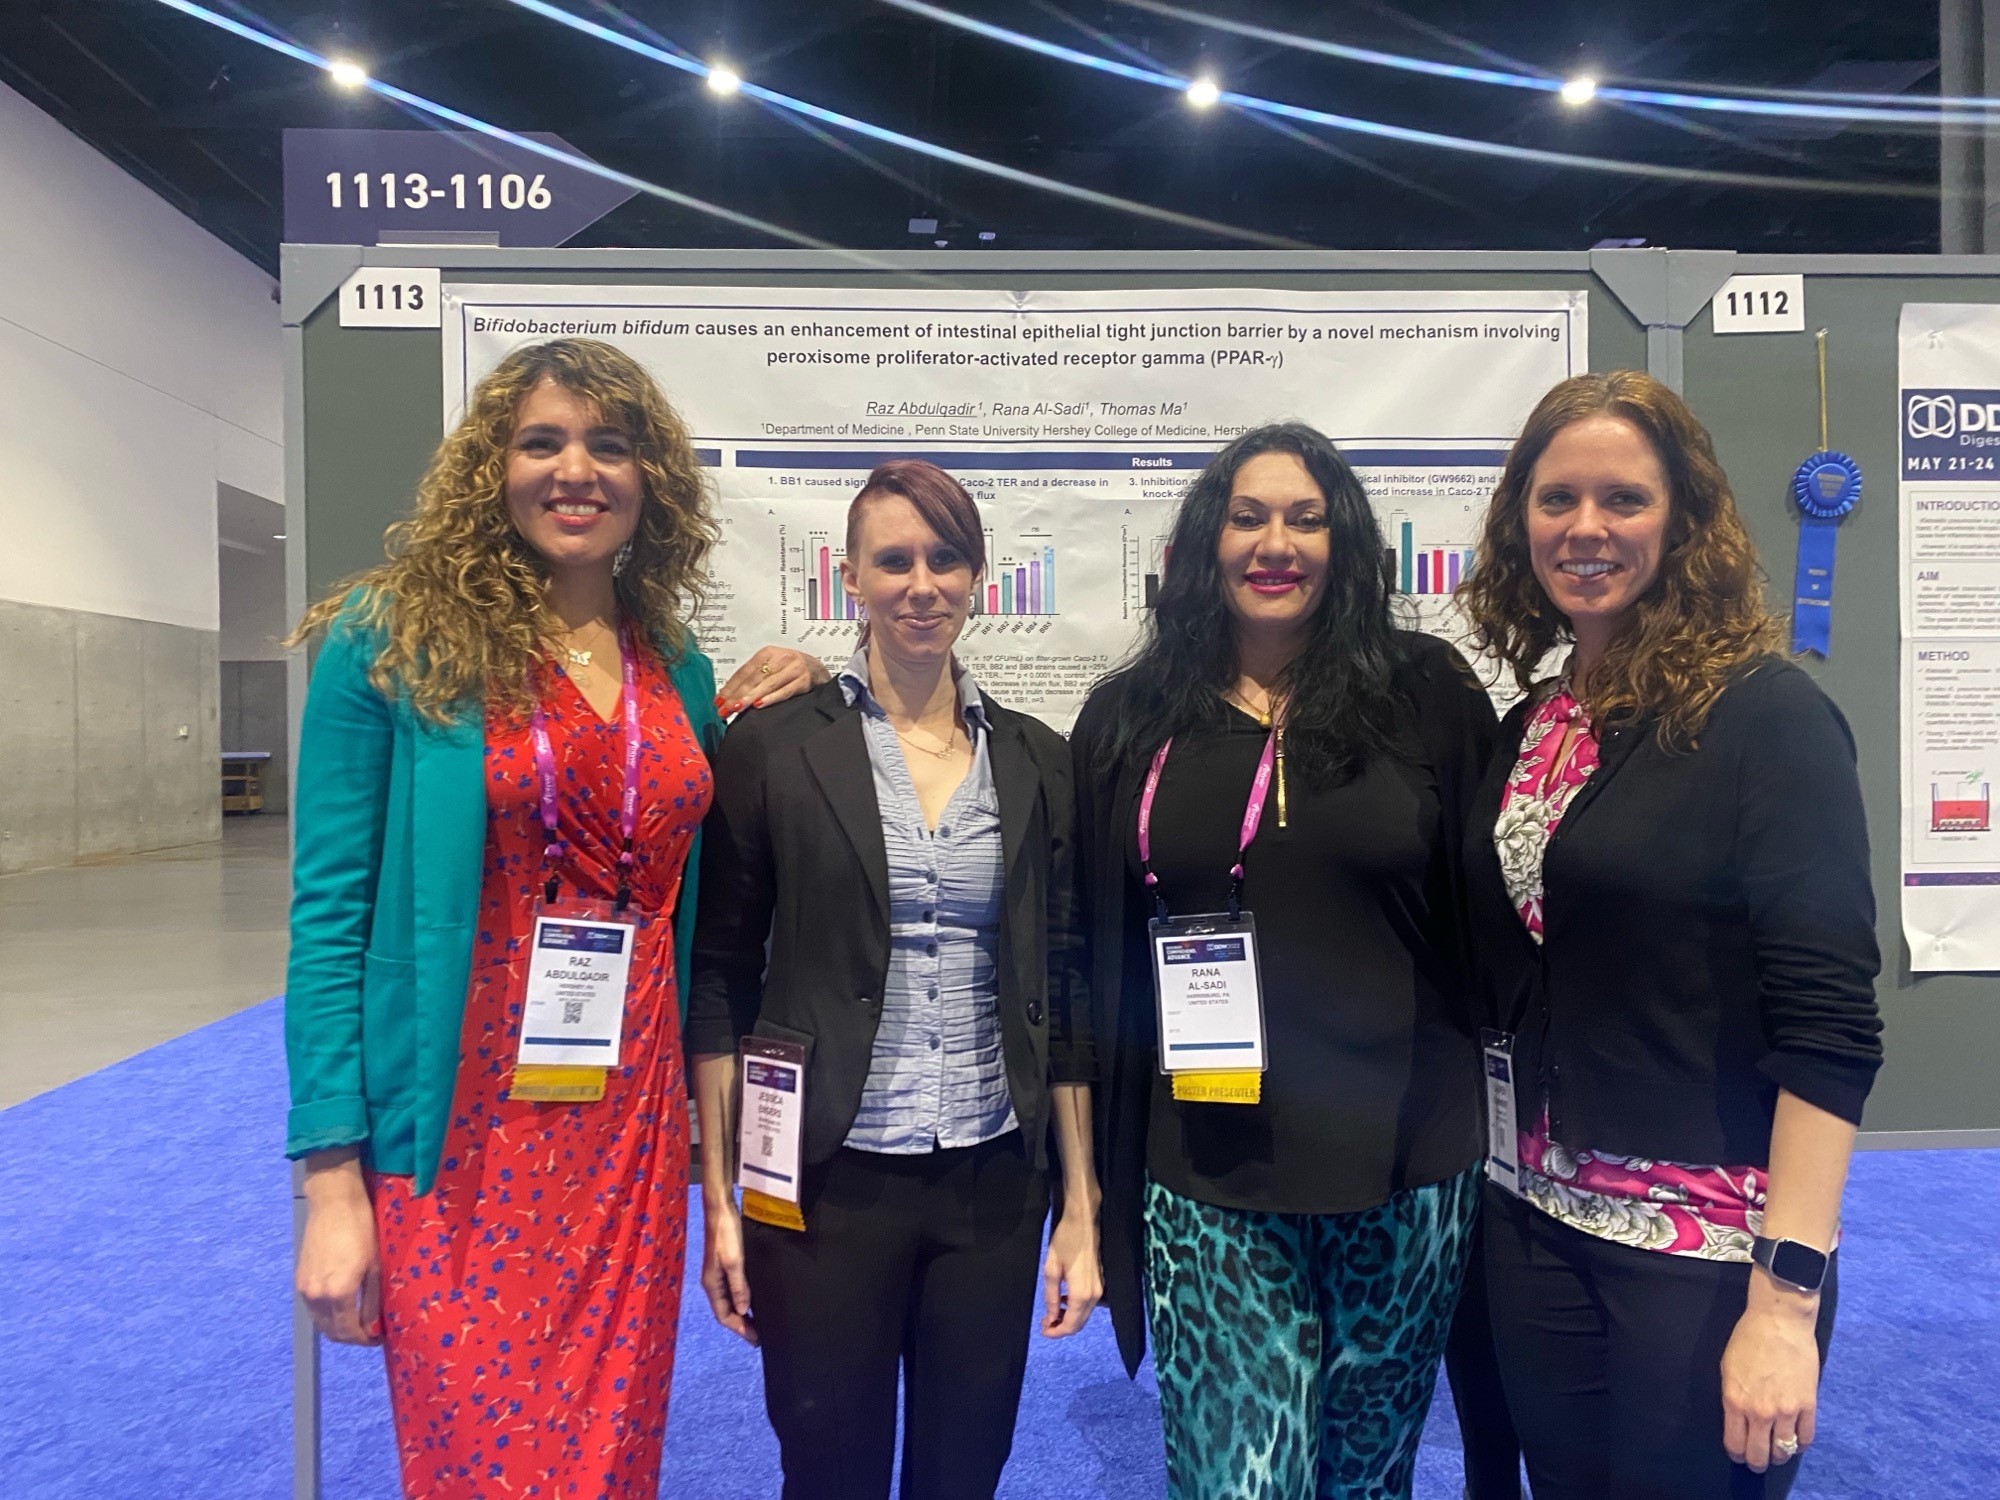 Dr. Raz Abdulqadir, left, gastroenterology fellow; Jessica Engers, research technologist; Dr. Rana Al-Sadi, researcher and assistant professor of medicine; and Dr. Lauren Kaminsky, allergy and immunology fellow, stand for a group photo in front of a research poster filled with text and graphics that was presented at the global Digestive Disease Week conference.